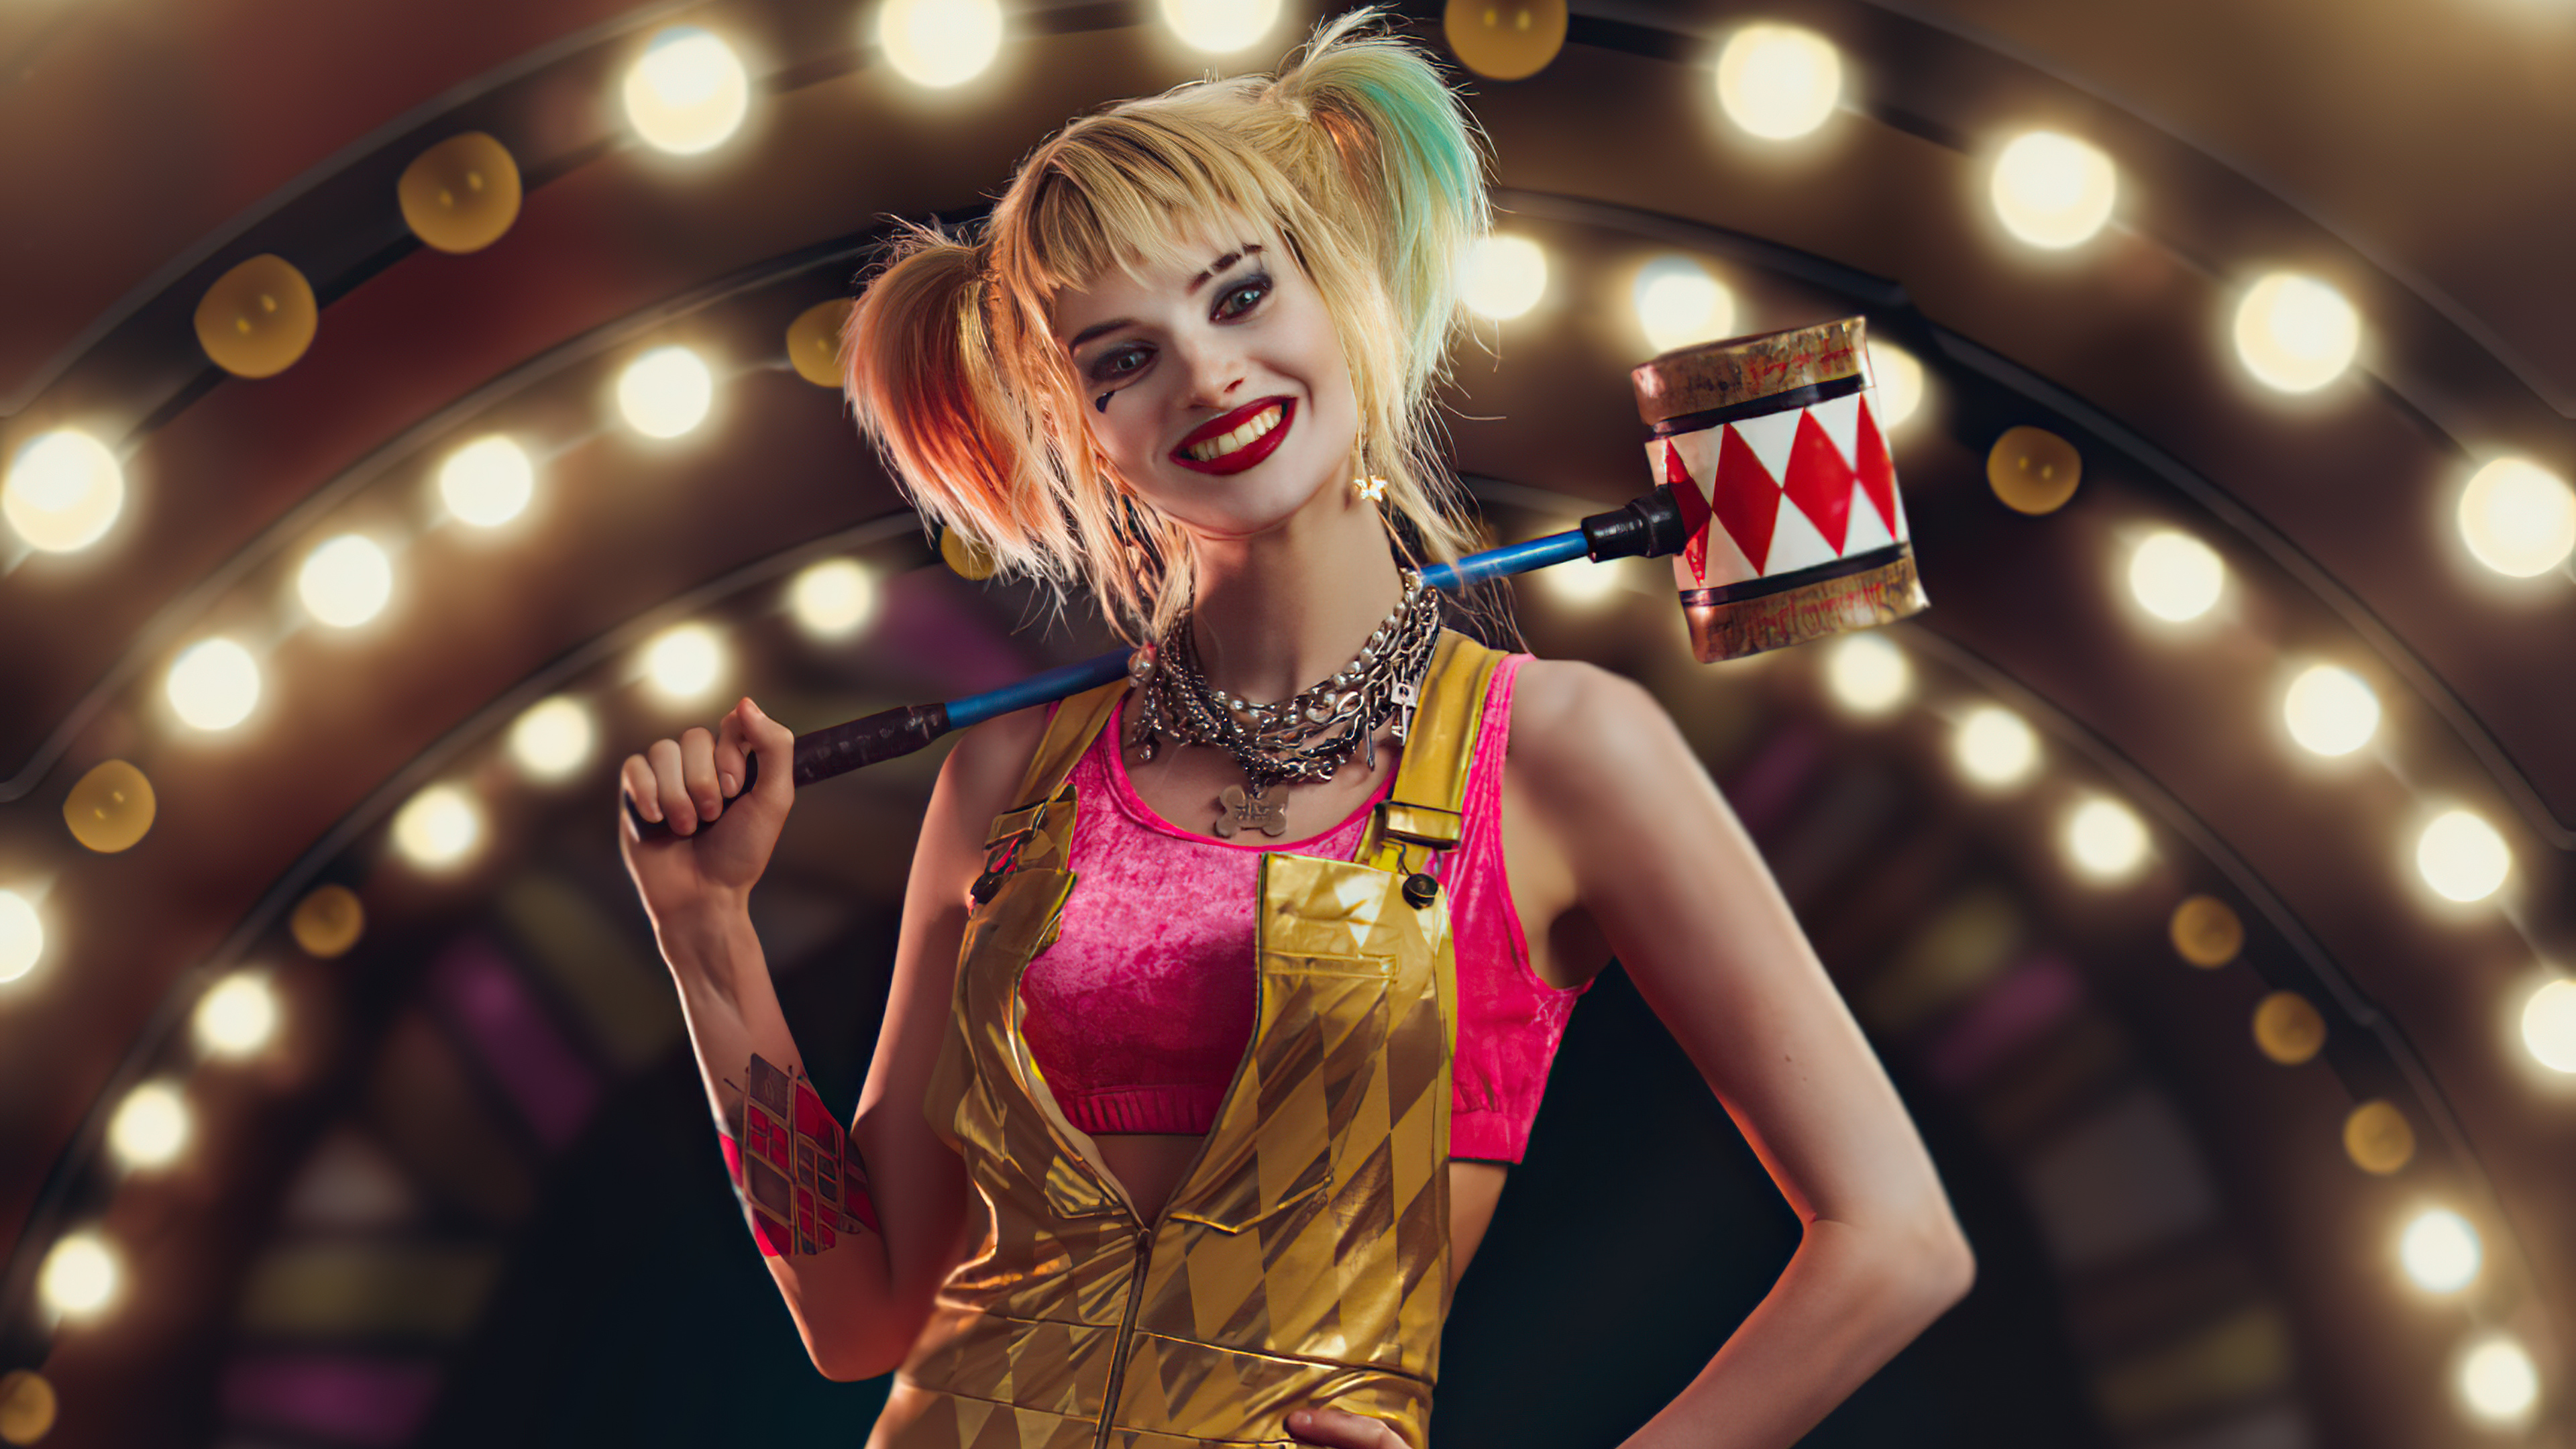 Wallpaper Harley Quinn Gold Overalls, Harley Quinn, Costume, Womens Costume,  Gold, Background - Download Free Image